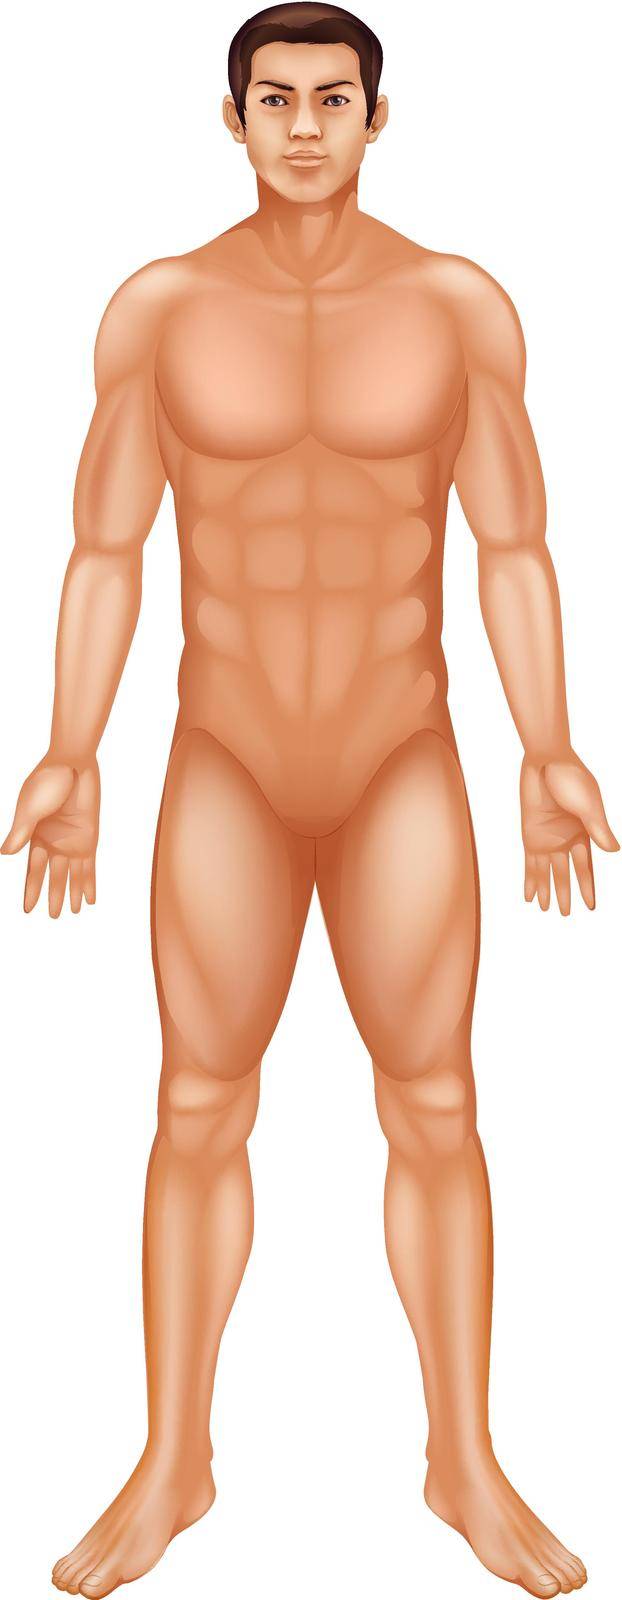 Illustration of a generic male body